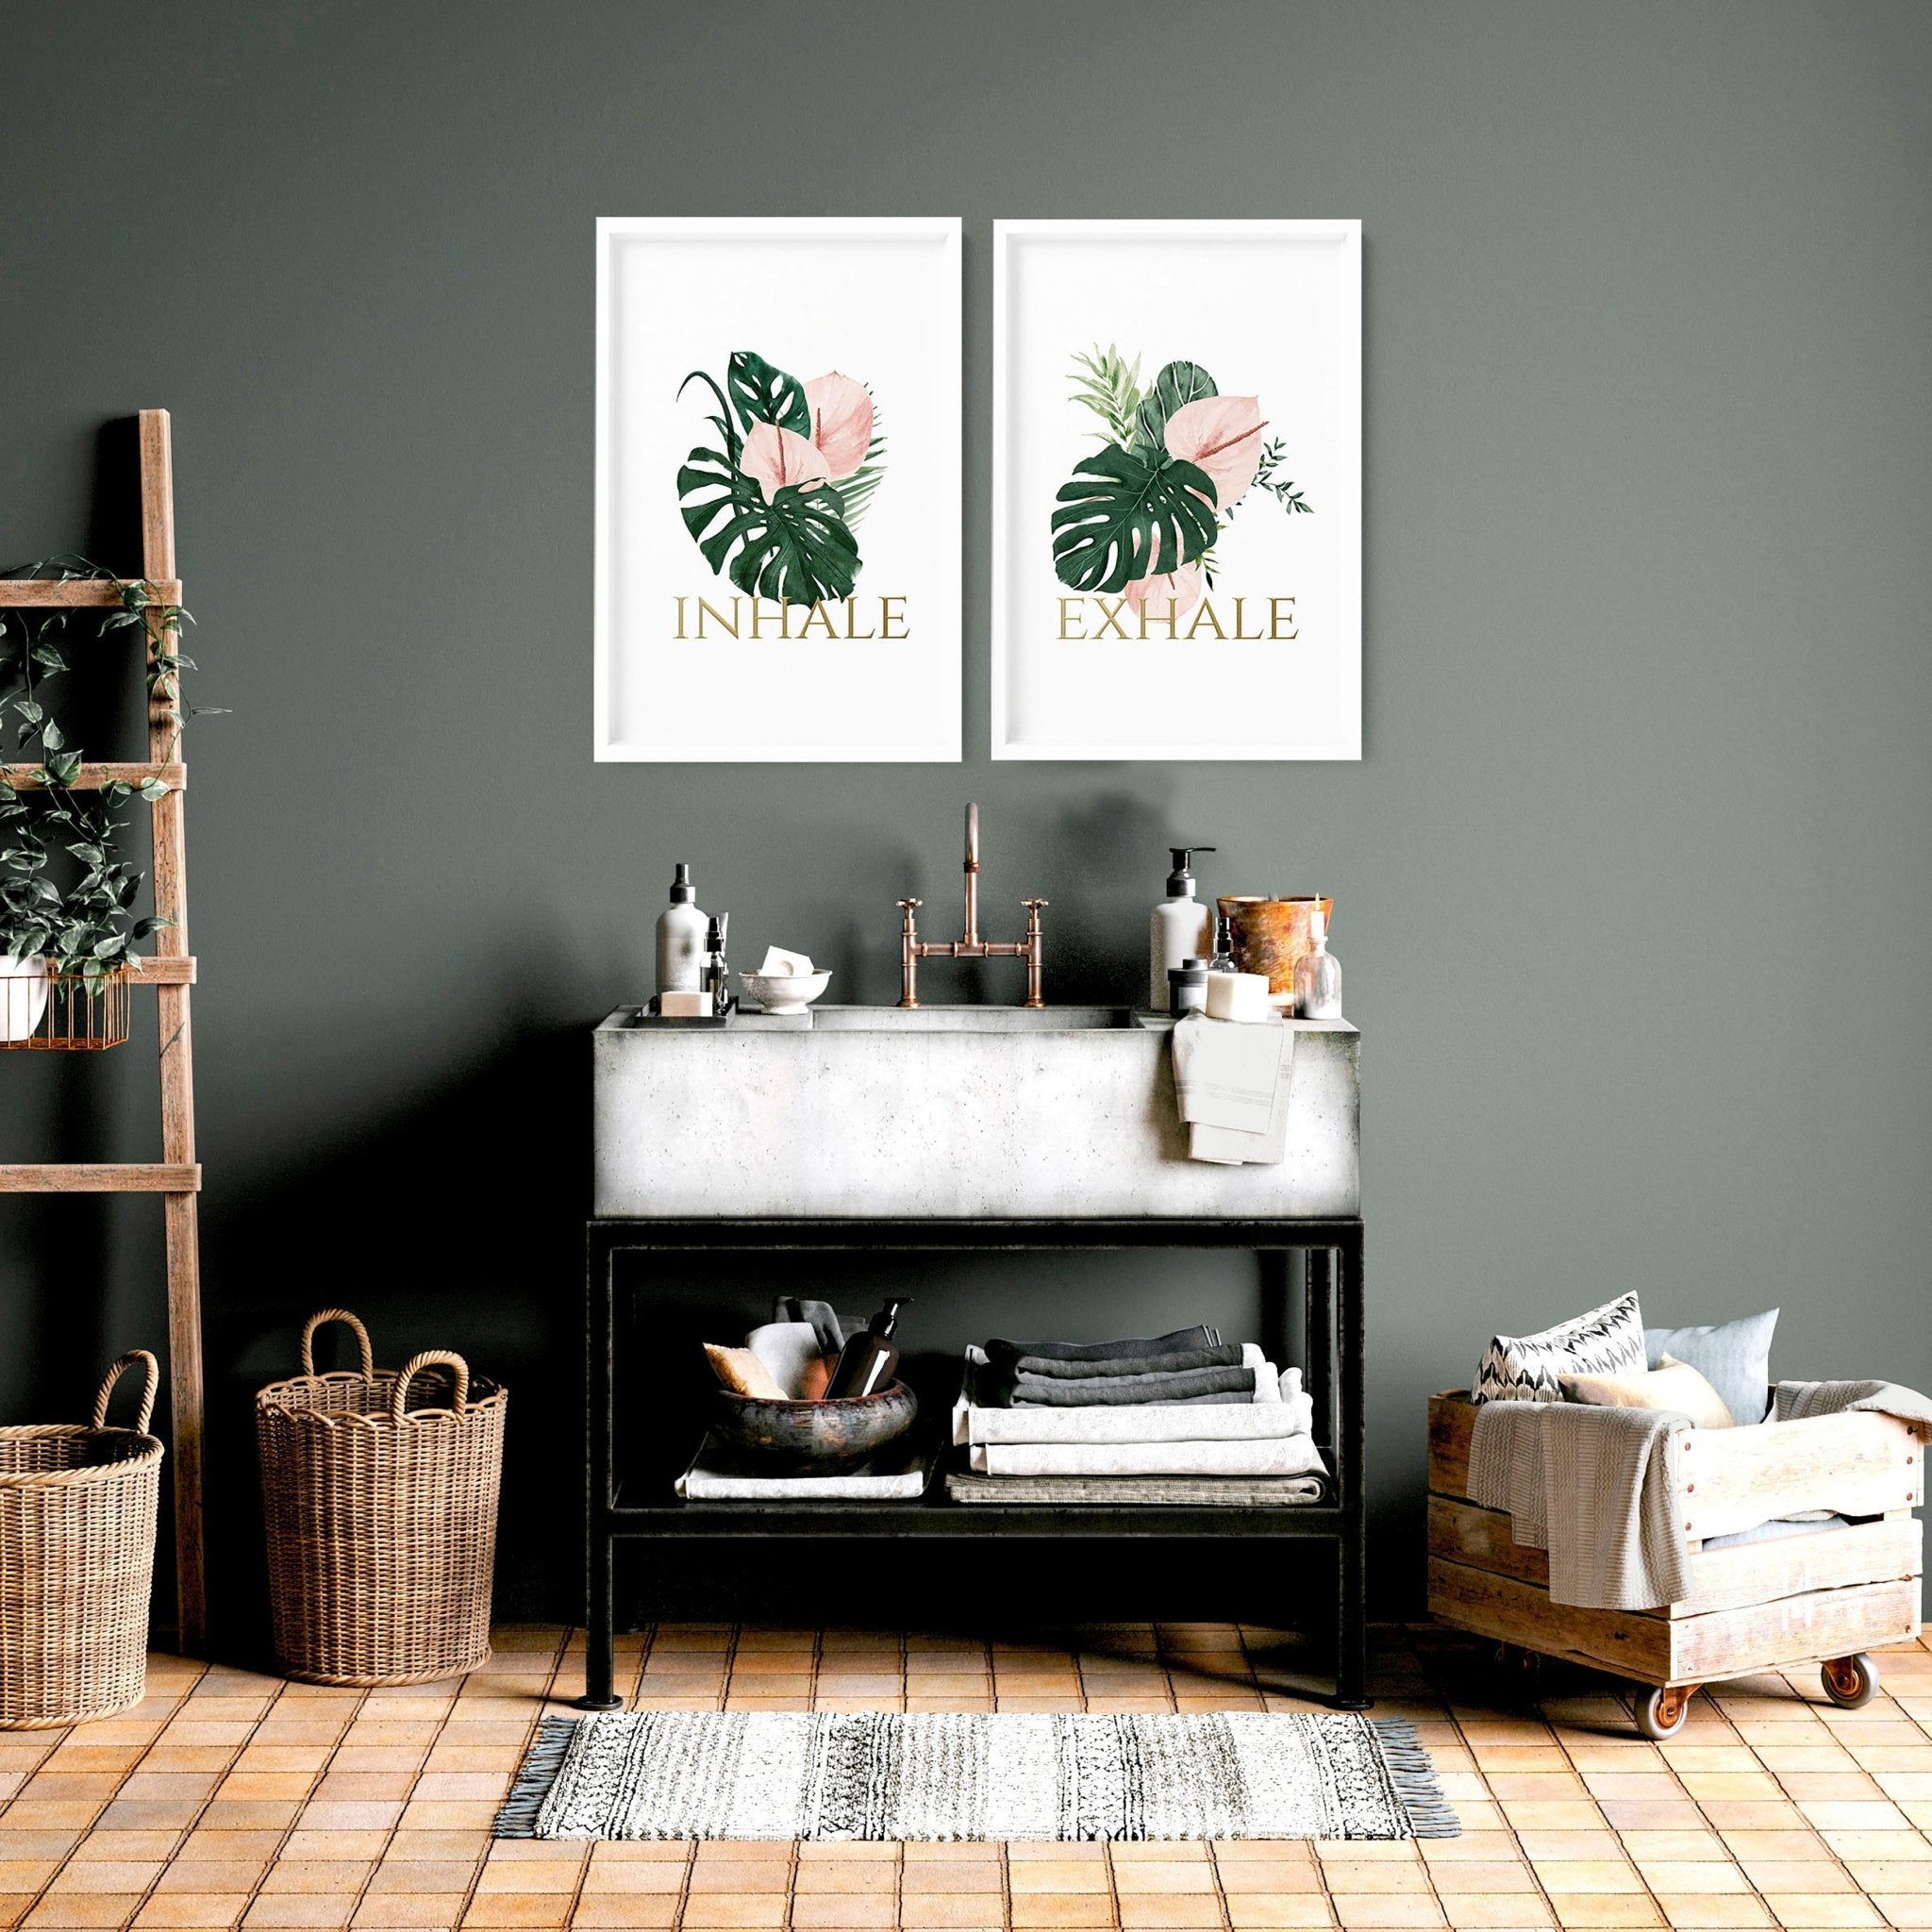 Relaxation wall art | set of 2 wall art prints for bathroom